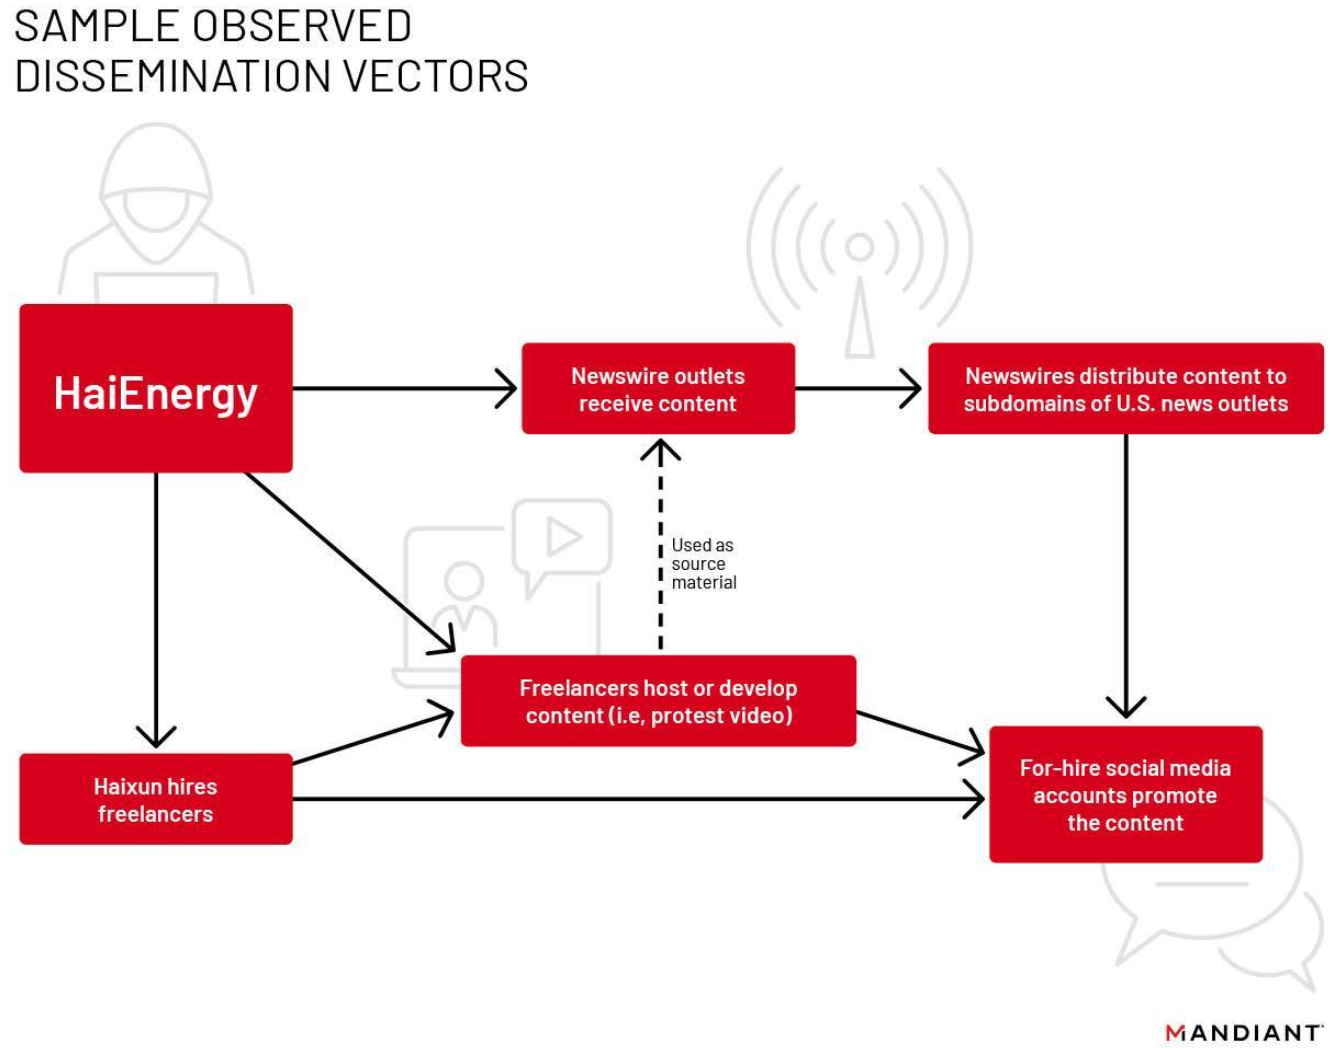 Workflow illustrating sample observed dissemination vectors from HaiEnergy campaign